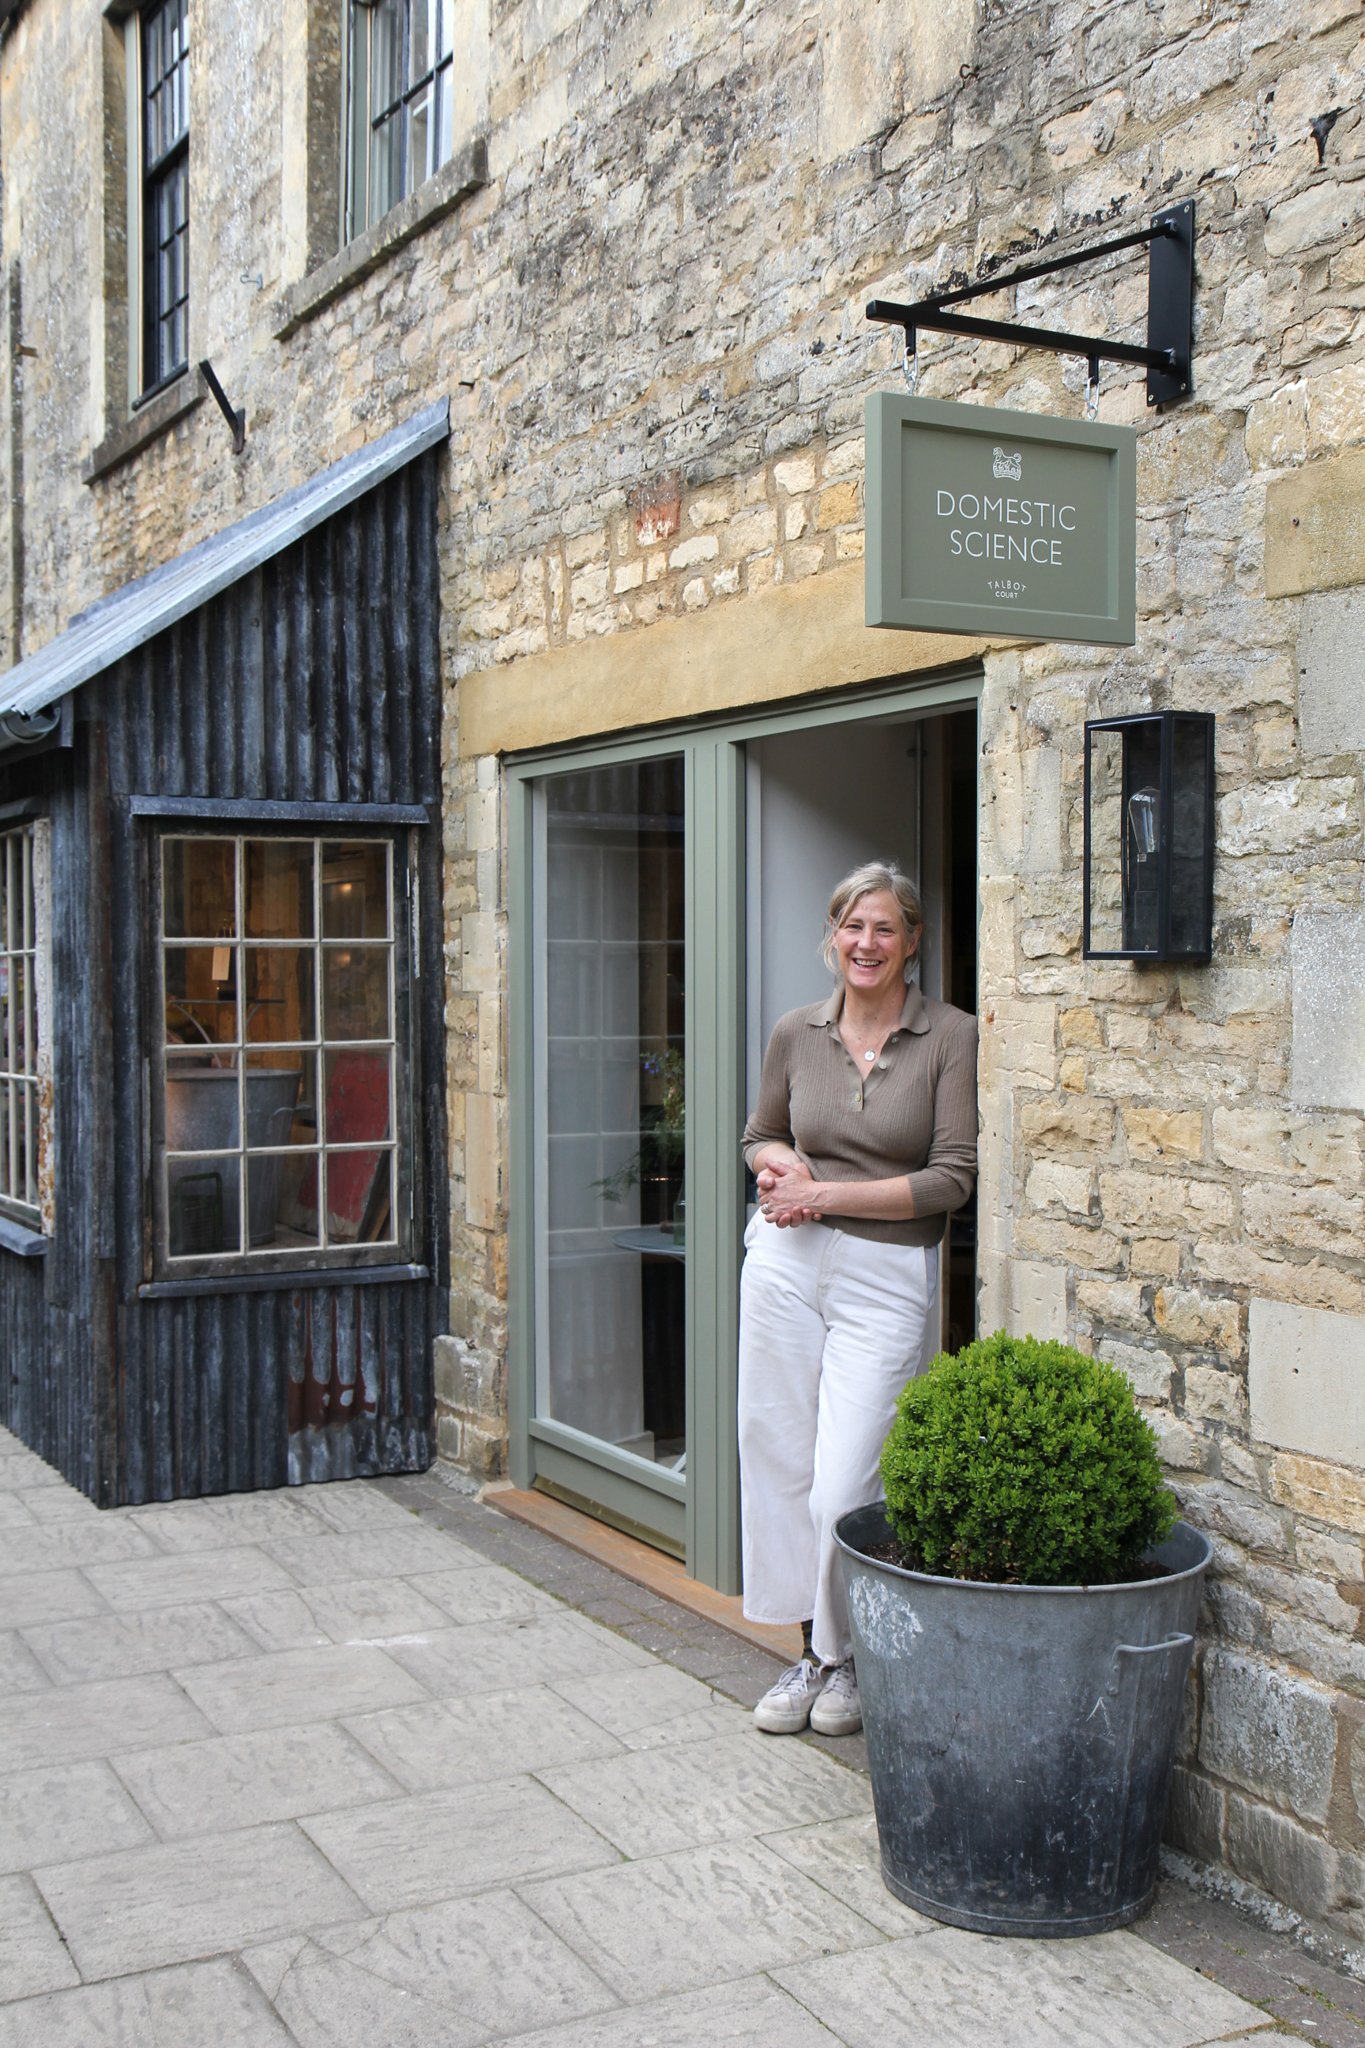 Domestic Science's owner Libs Lewis outside her vintage homeware store